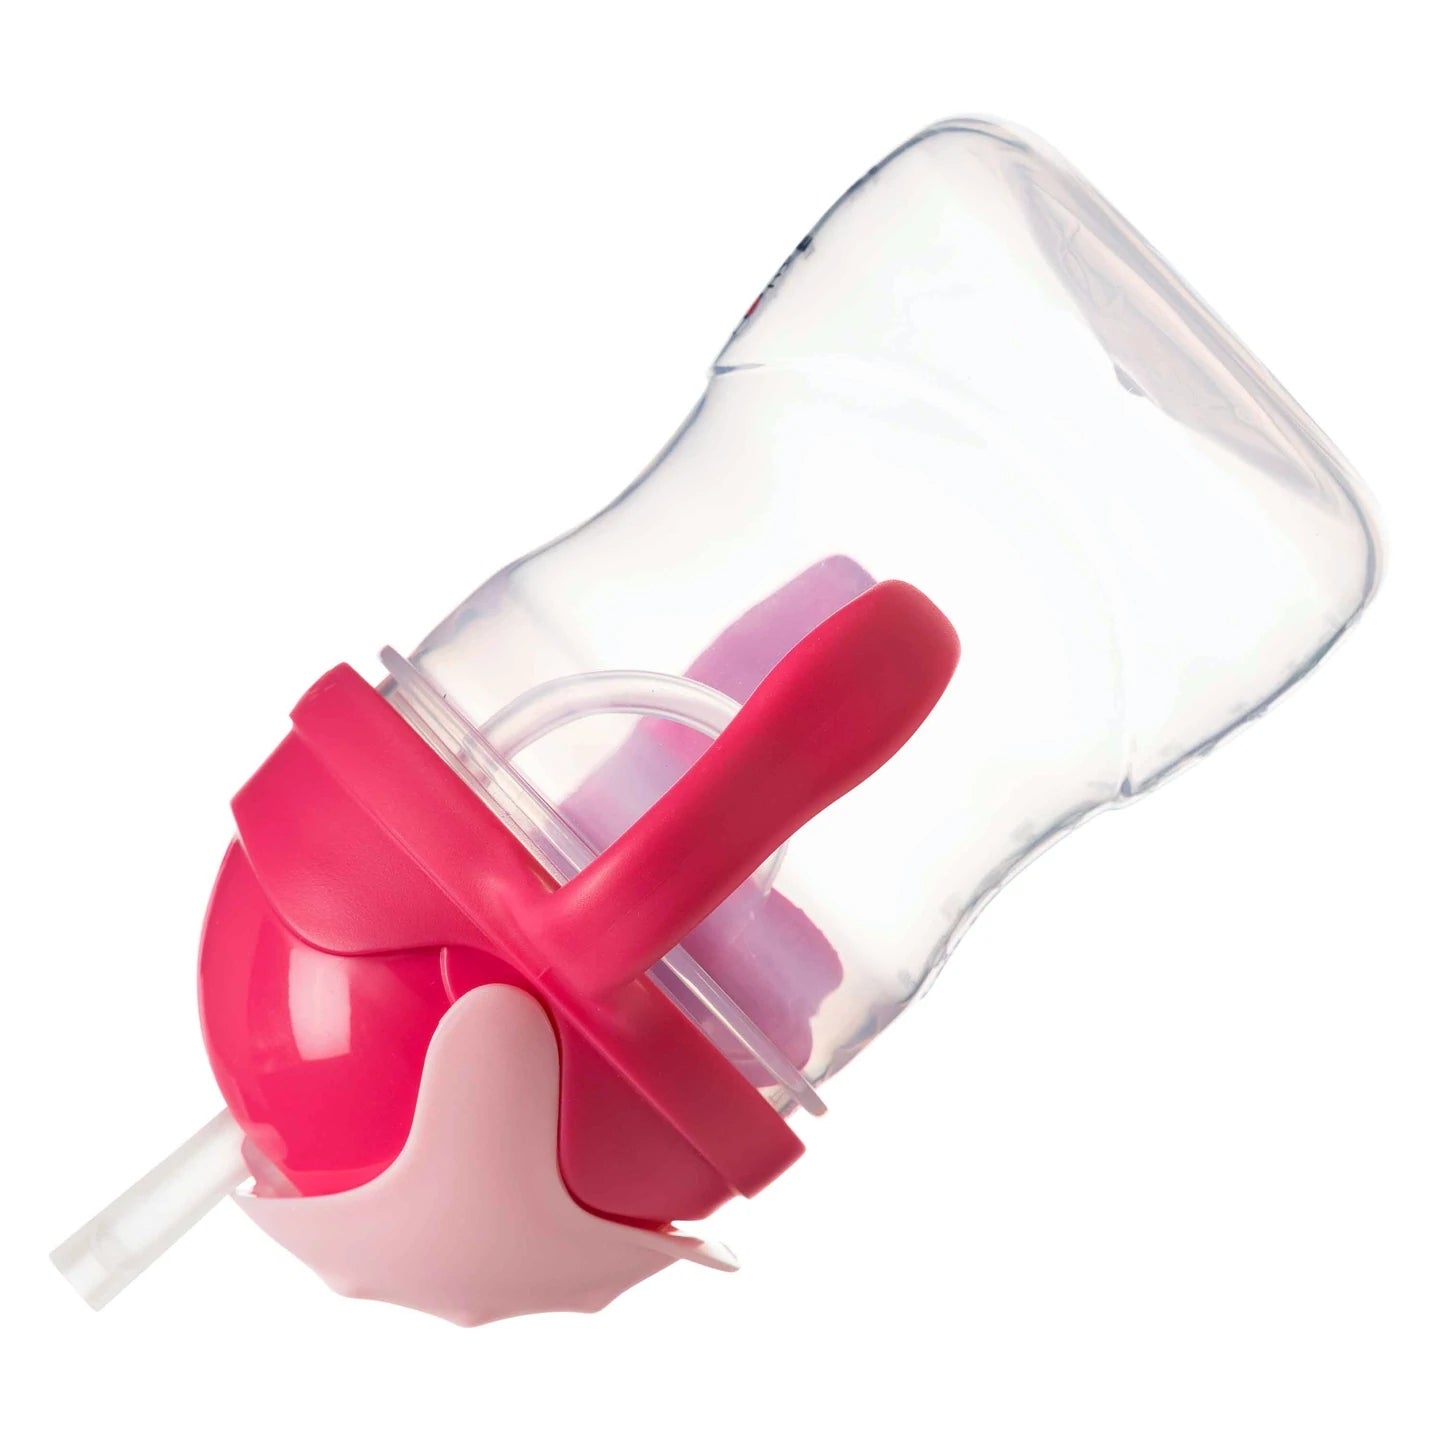 B.BOX Hello Kitty Sippy Cup Pop Star Pink / Red.